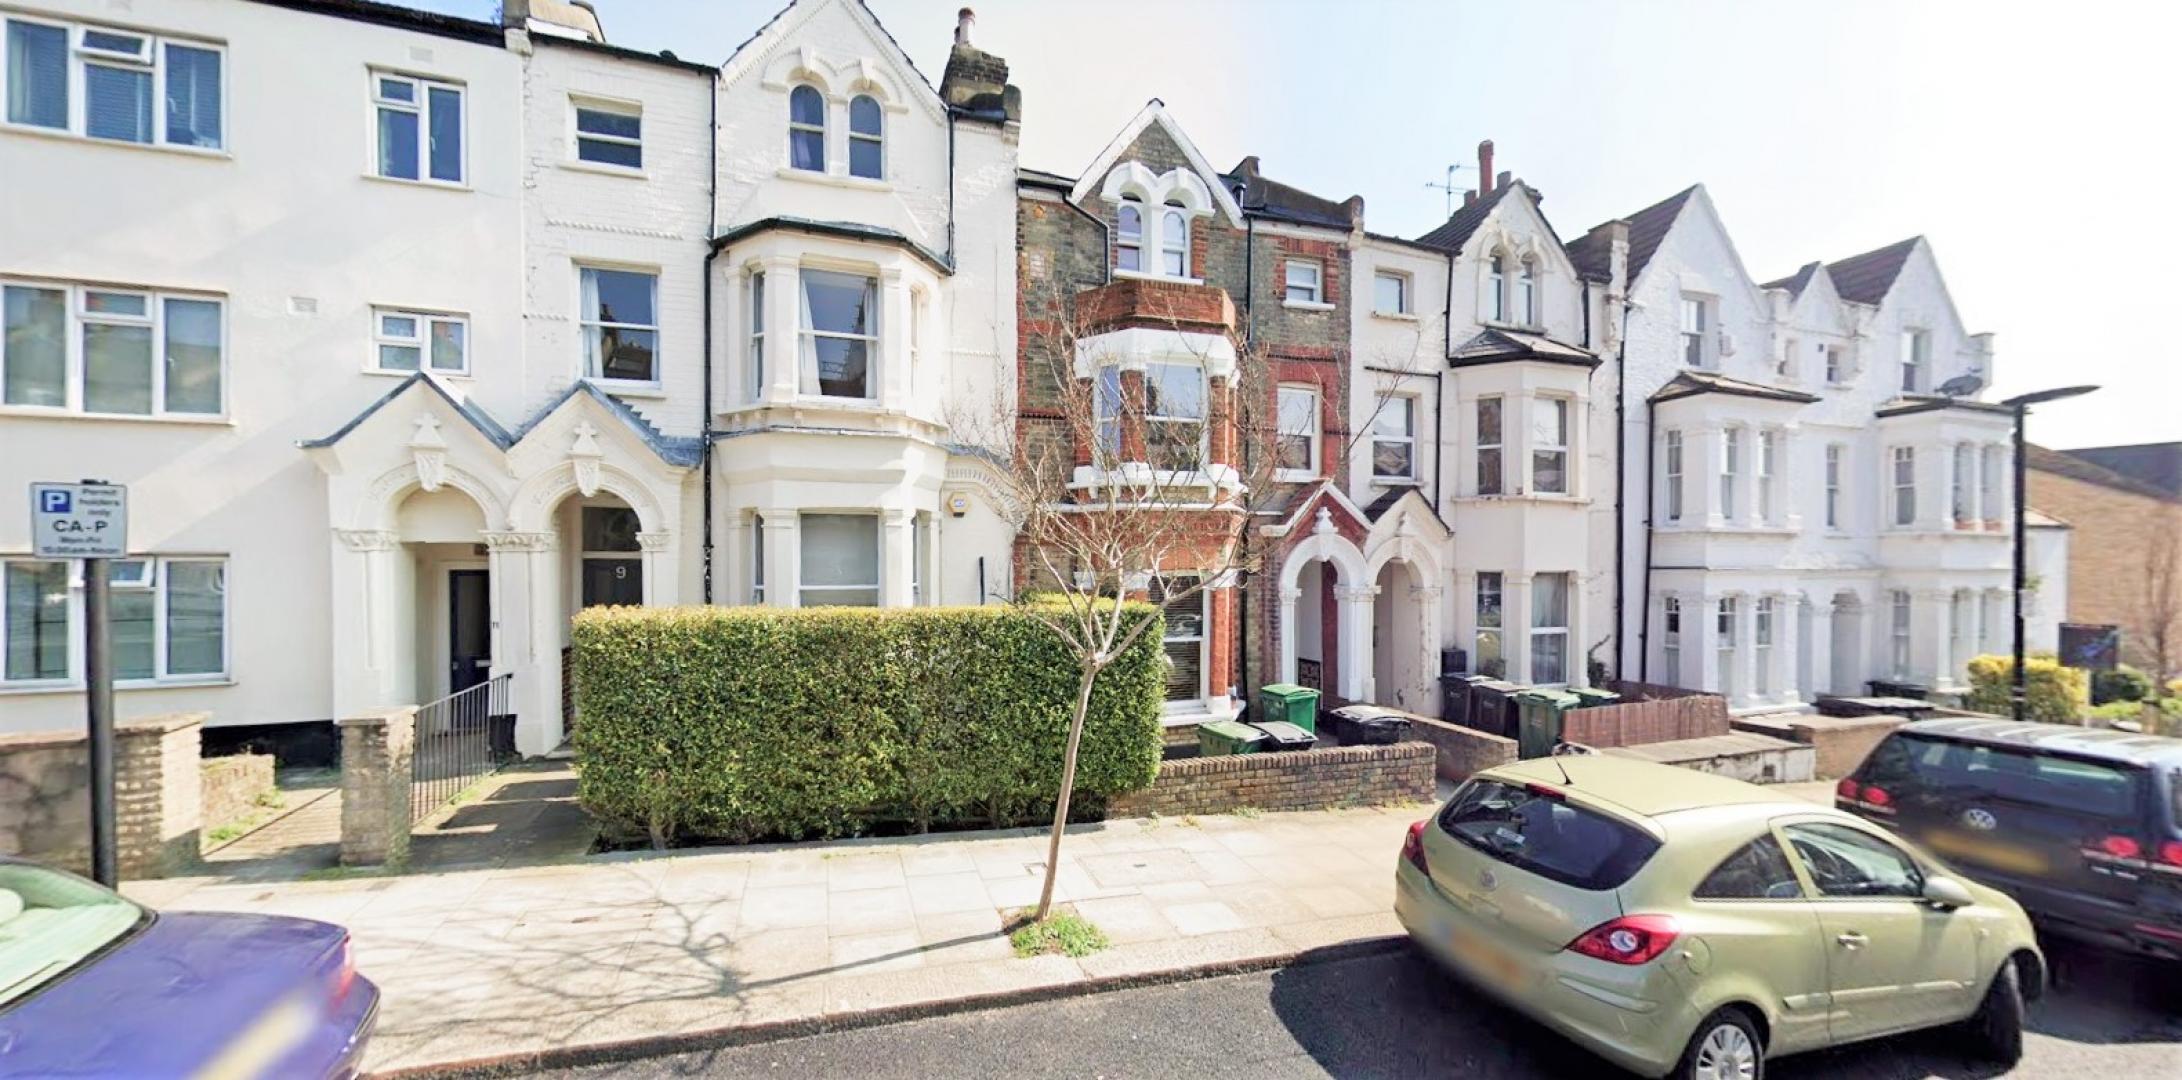 			ELECTRICITY & GAS INCLUDED, 1 Bedroom, 1 bath, 1 reception Apartment			 Agamemnon Road, WEST HAMPSTEAD